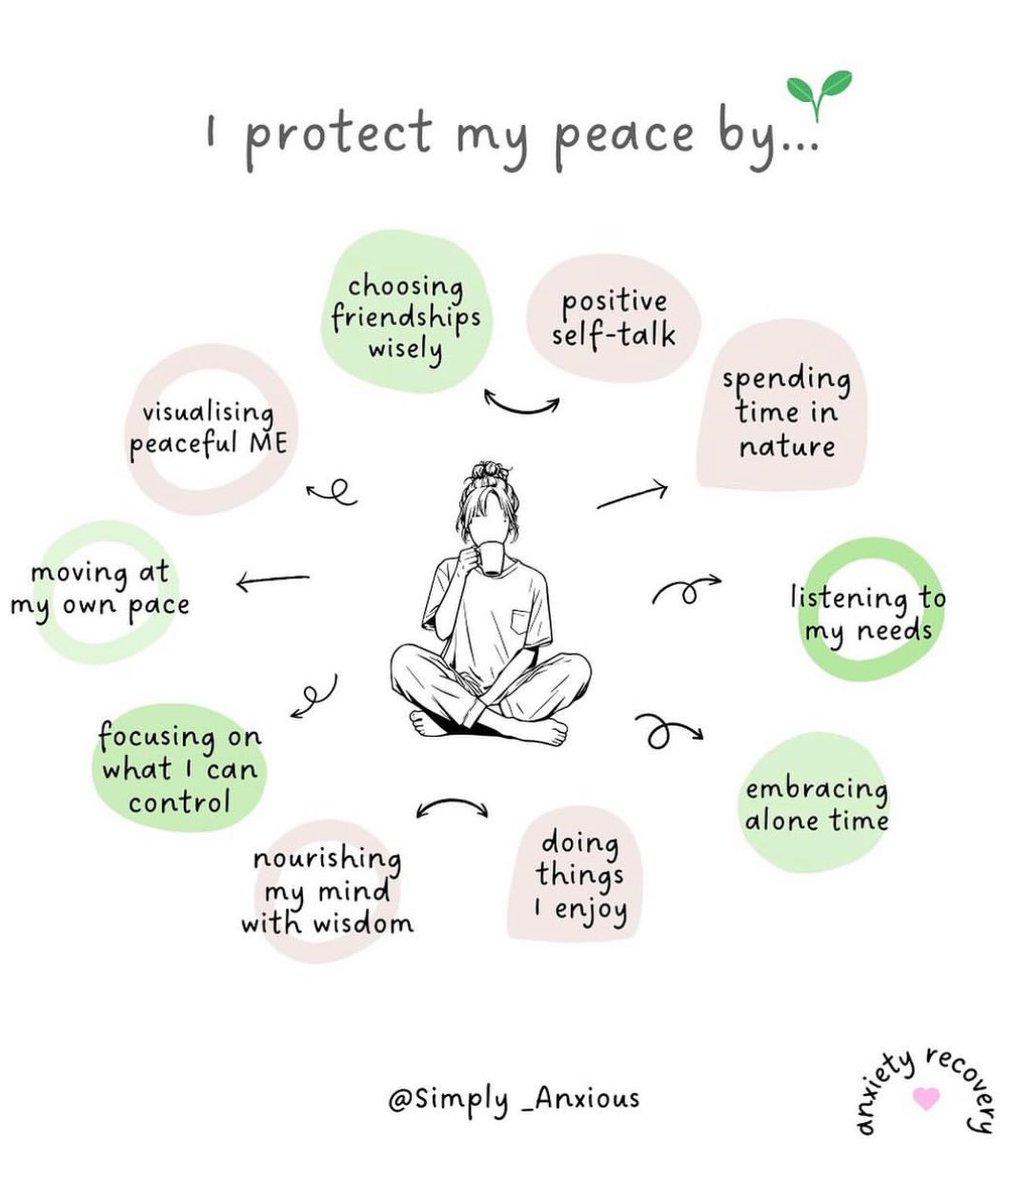 How will you choose to protect your peace today? It’s so important to protect our inner peace in a healthy way, so that we can be present for those around us. #innerpeace #healthylifestyle #mentalhealth #theolivebranchcounselingcenter